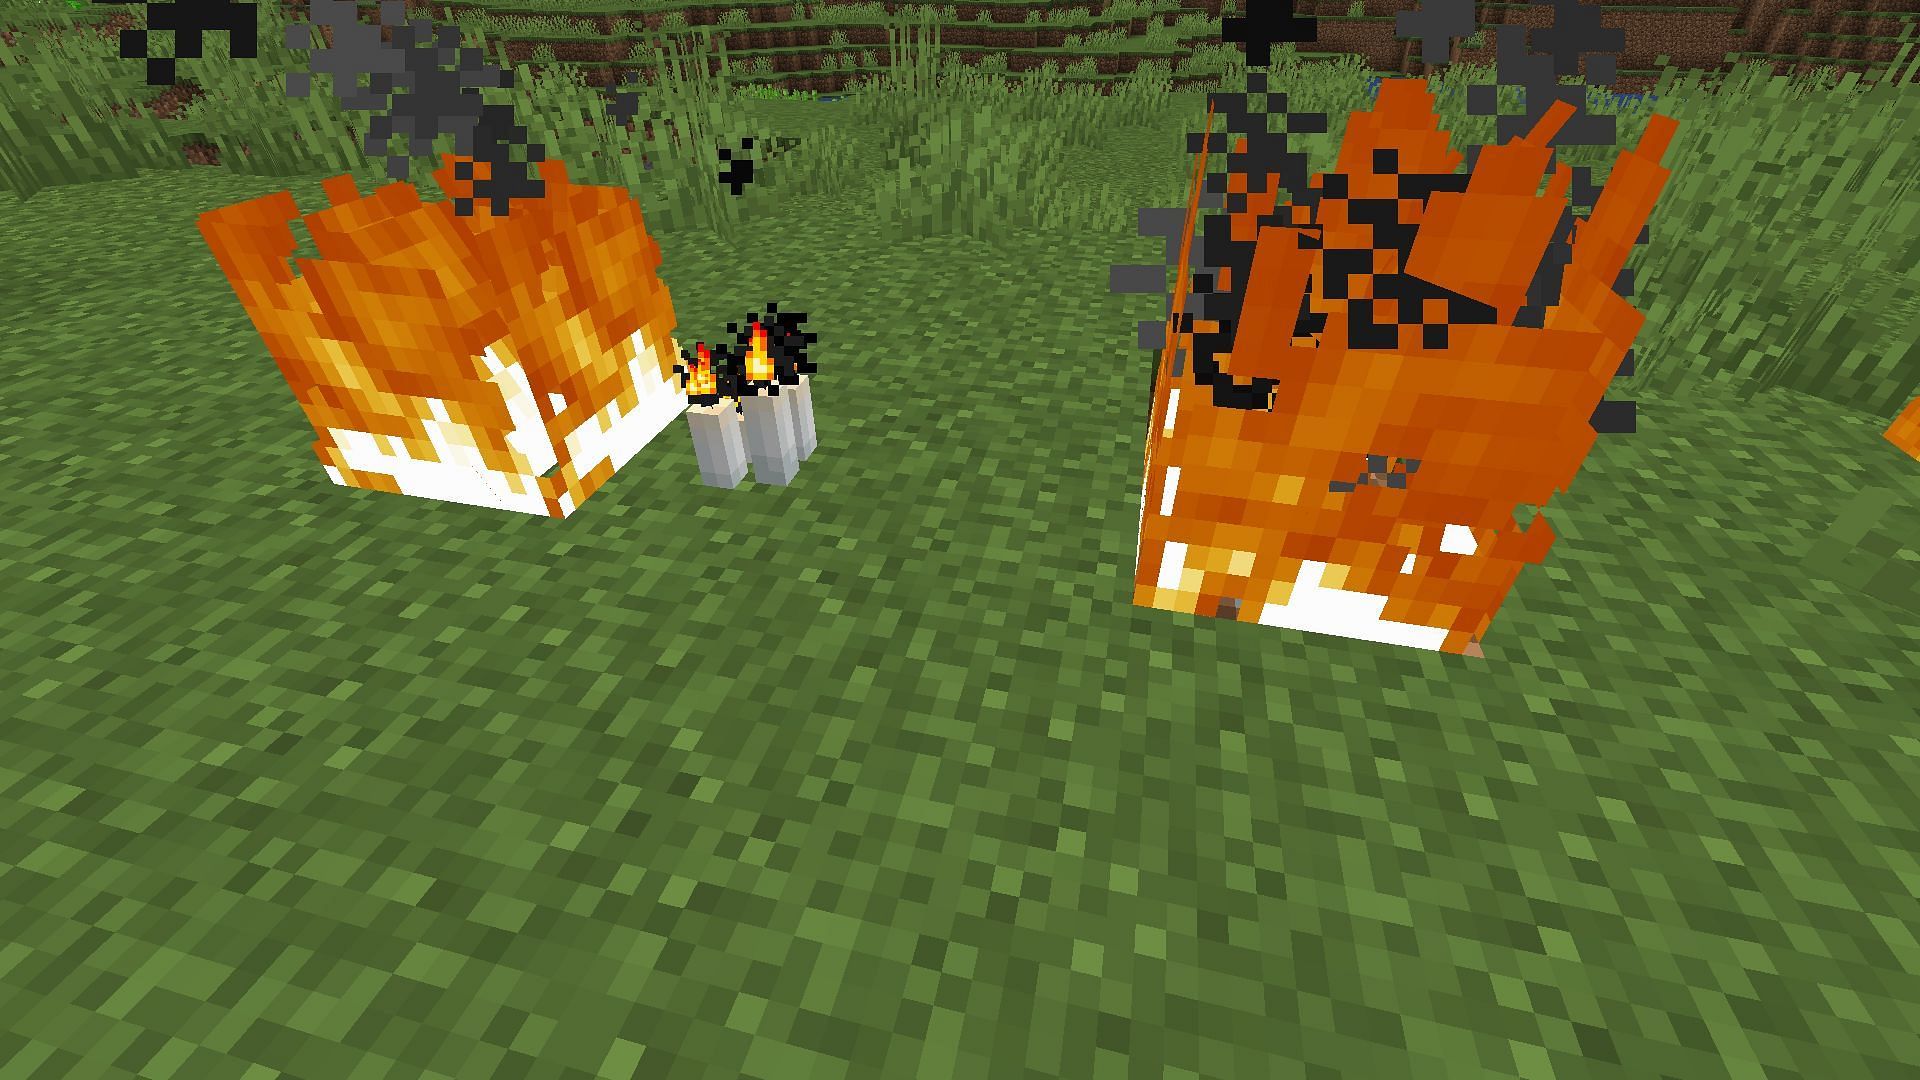 A candle being lit by a nearby fire (Image via Minecraft)